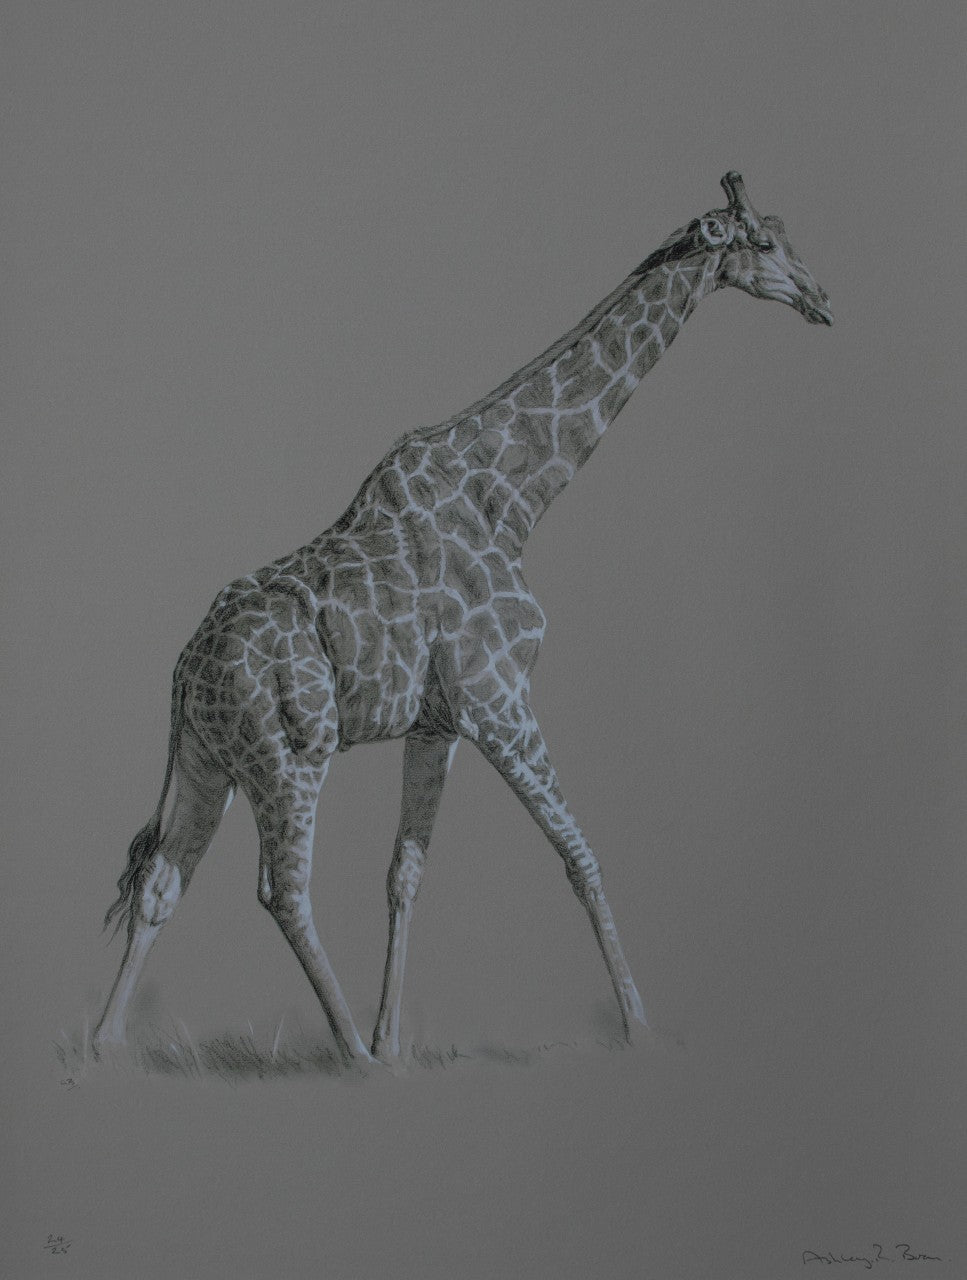 031. 'Southern Giraffe' Limited Edition Print (25 only) by Ashley Boon - 26" x 20"